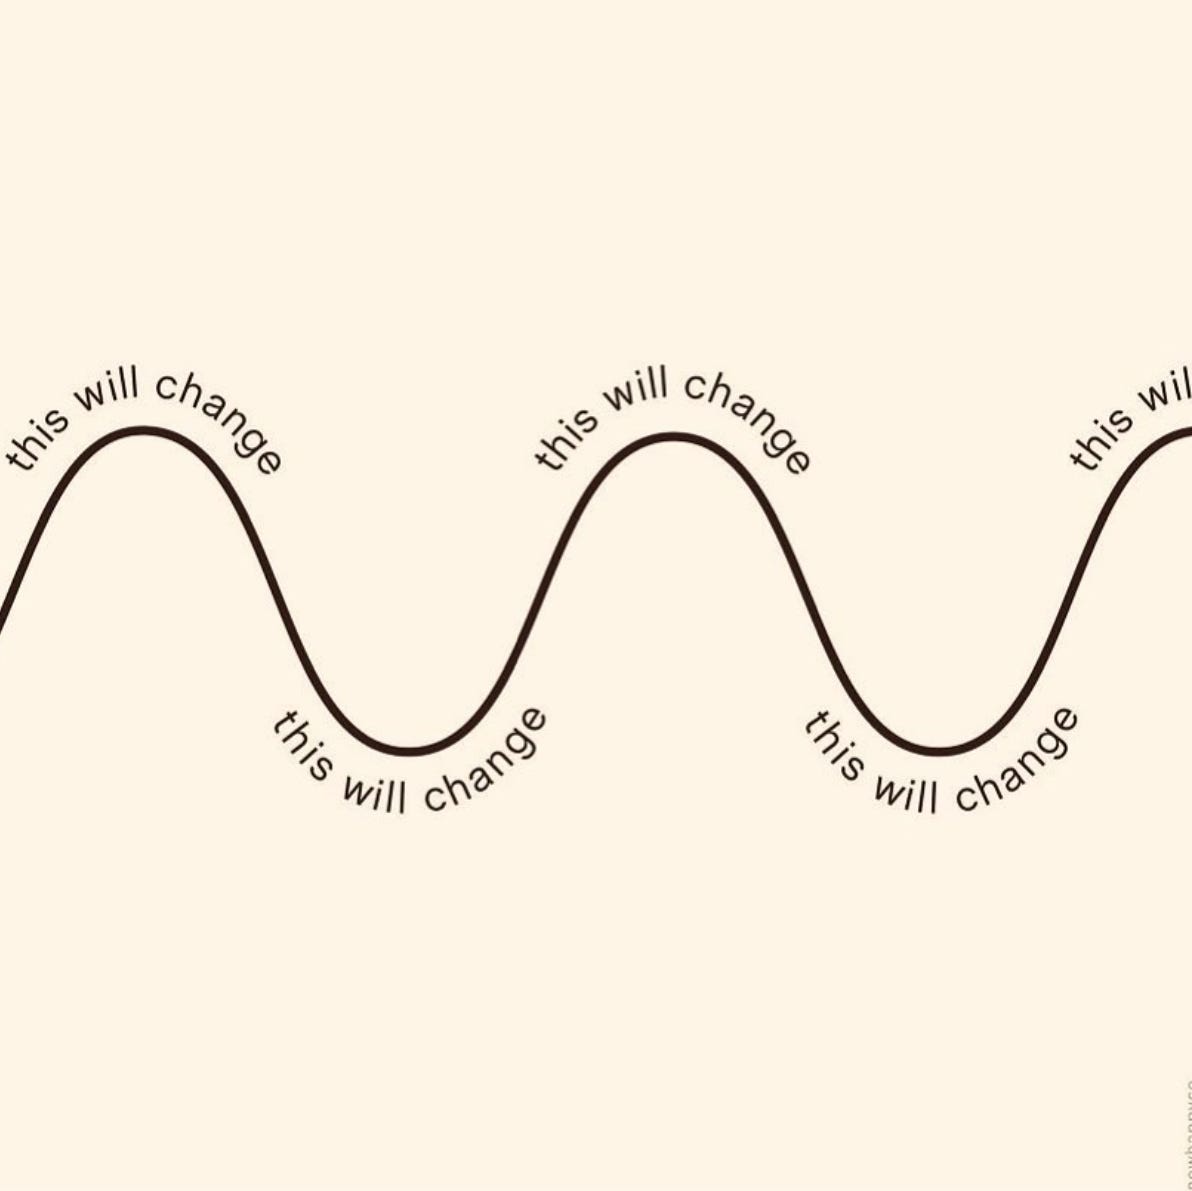 A squiggly line representing the ups and downs of life. At each up hill and down dip are the words "this will change".